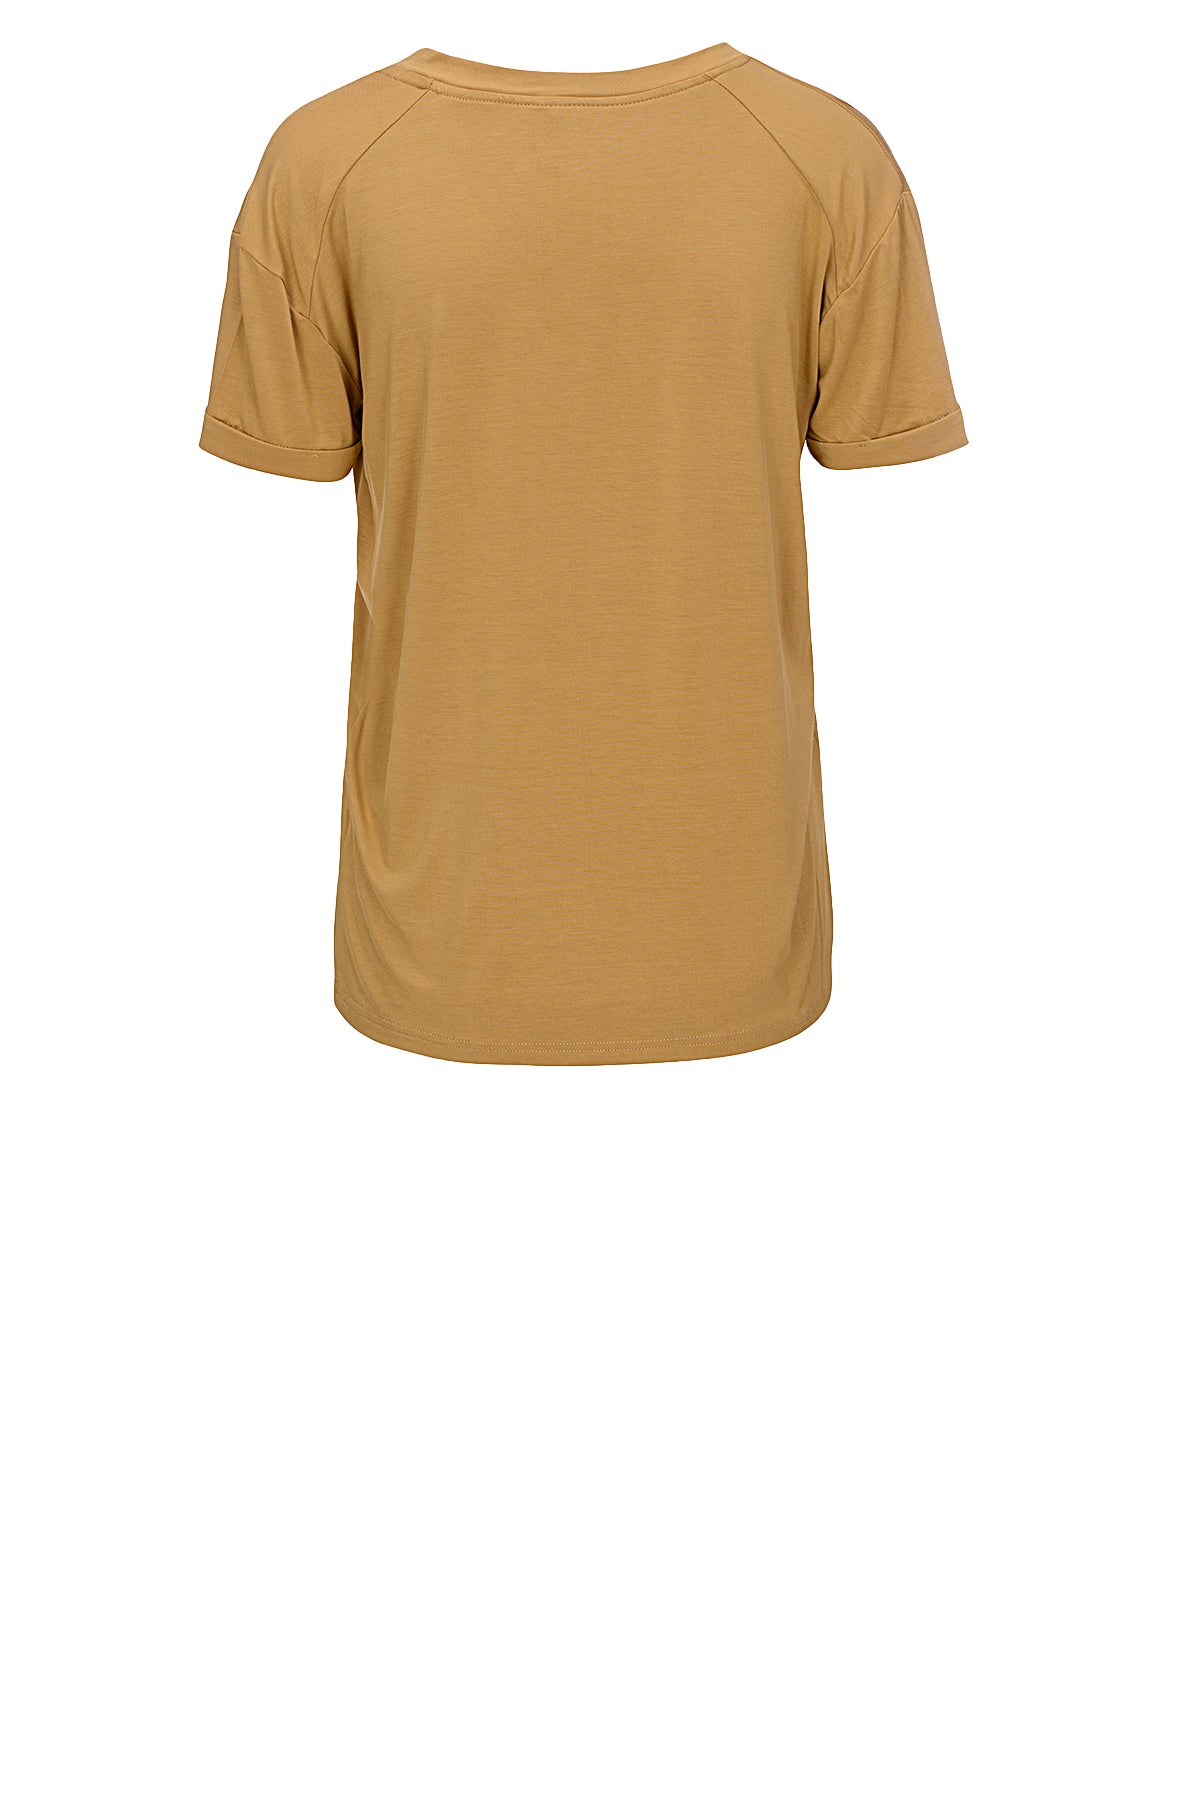 LUXZUZ // ONE TWO Karvi Bamboo T-Shirt